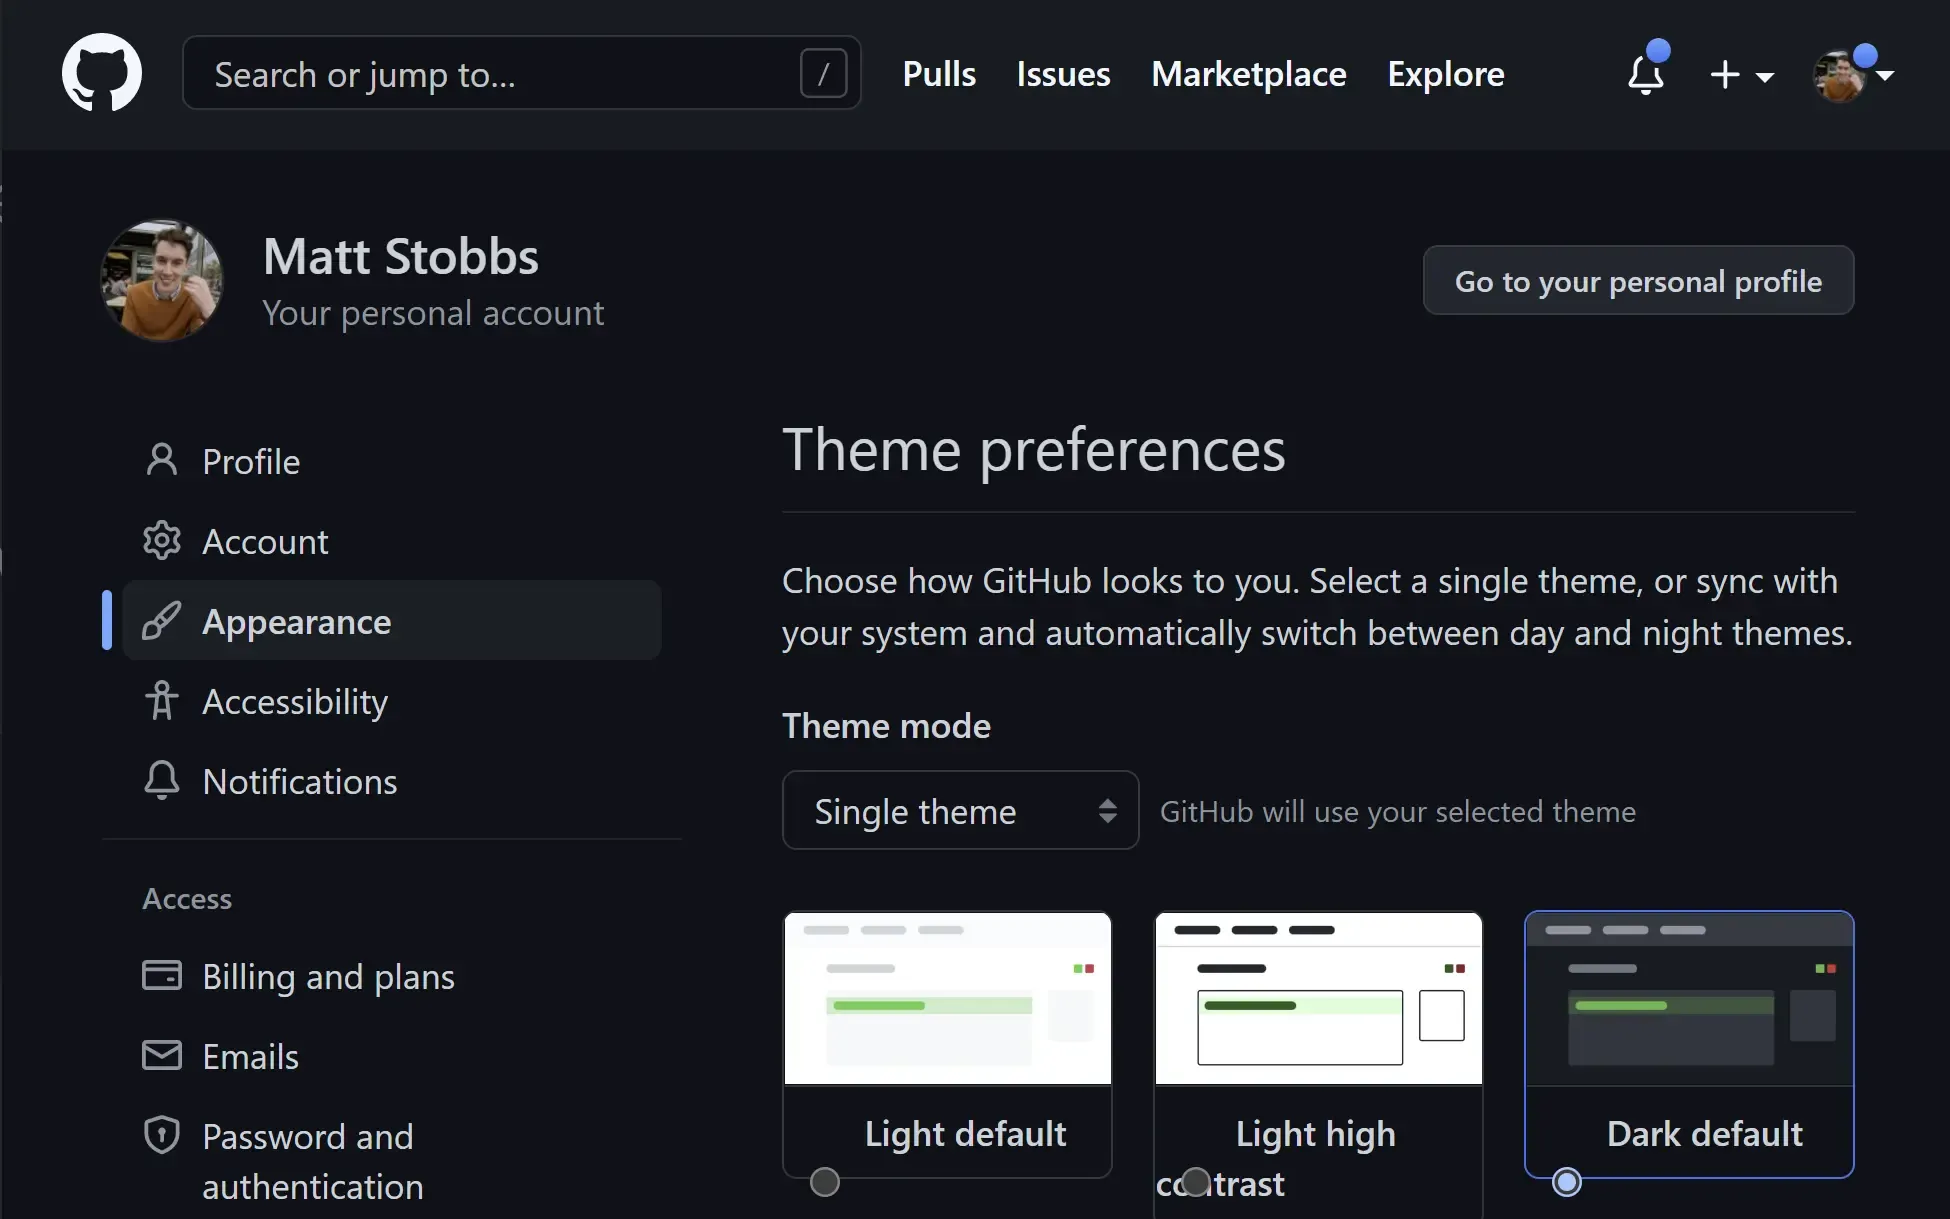 The appearance settings page of GitHub.